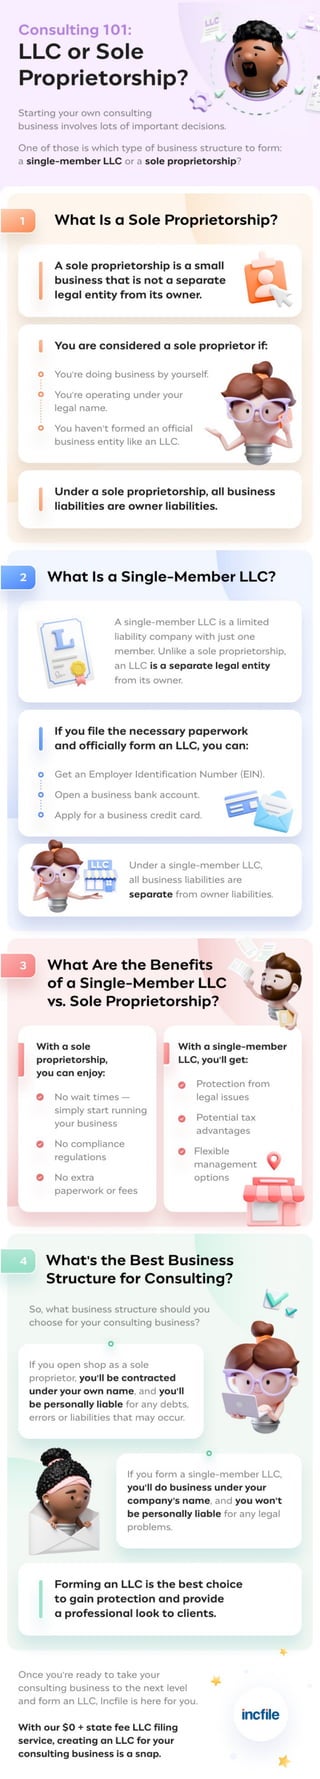 LLC vs. Sole Proprietorship: Which One Is Right for Your Small Business?